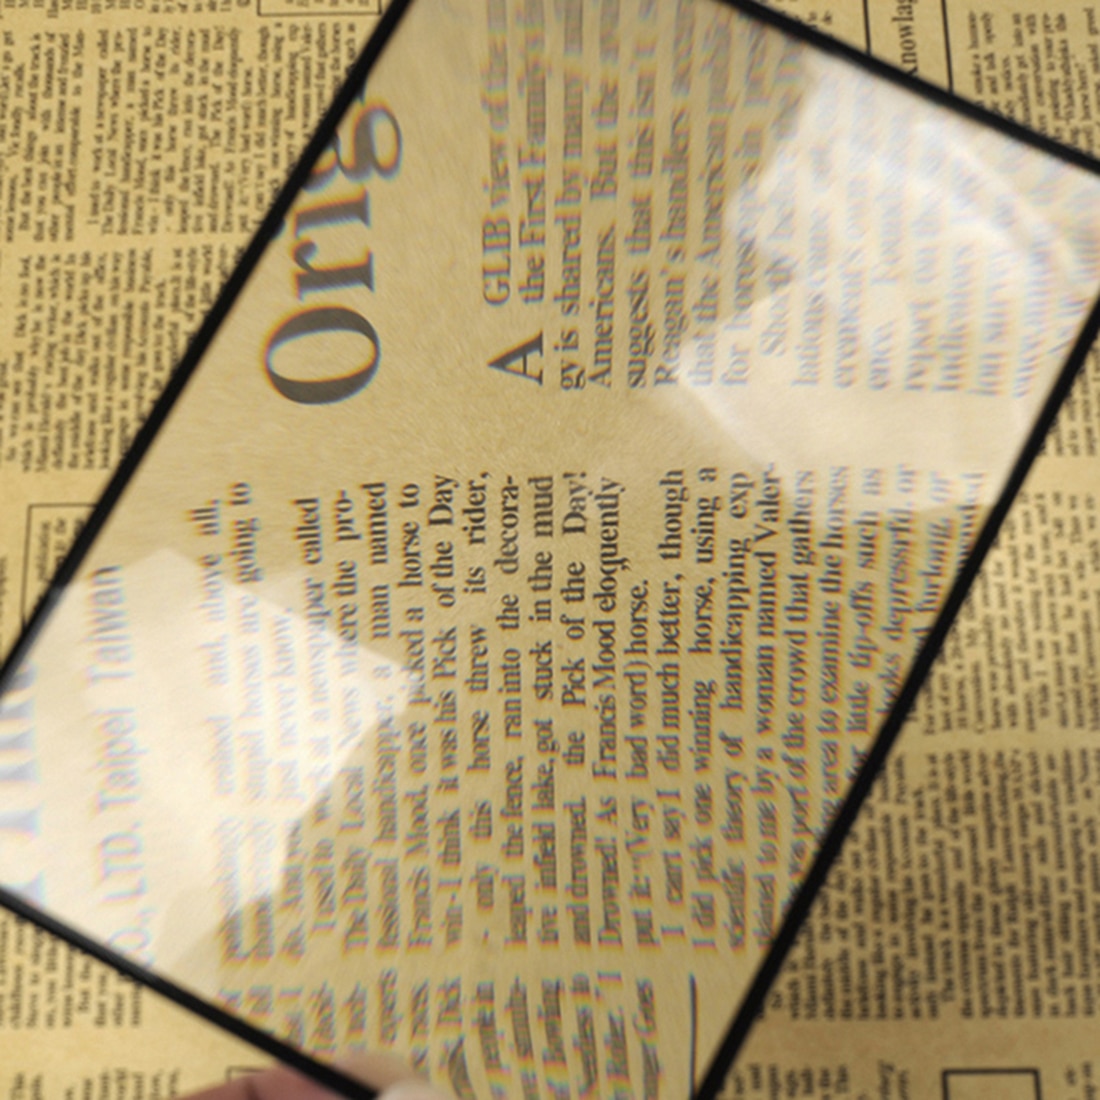 A5 PVC Magnifying Sheet for Reading